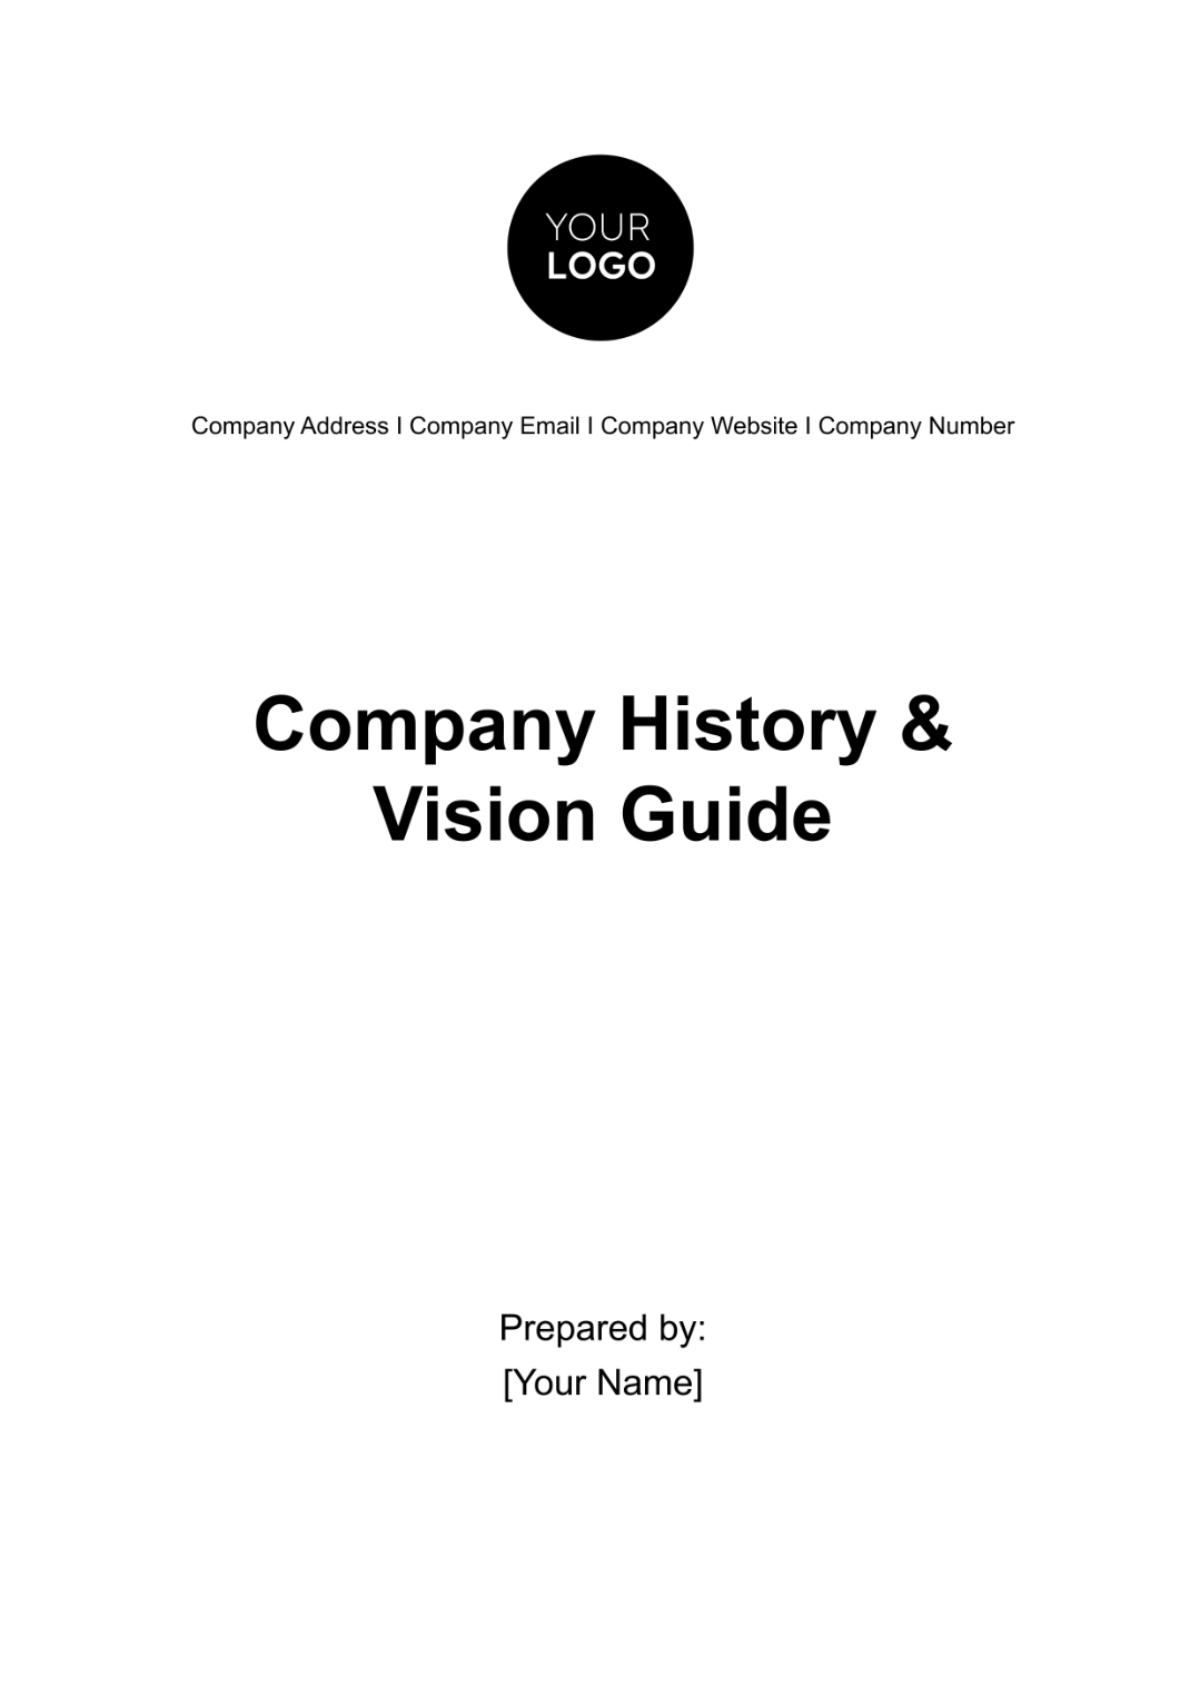 Free Company History & Vision Guide HR Template